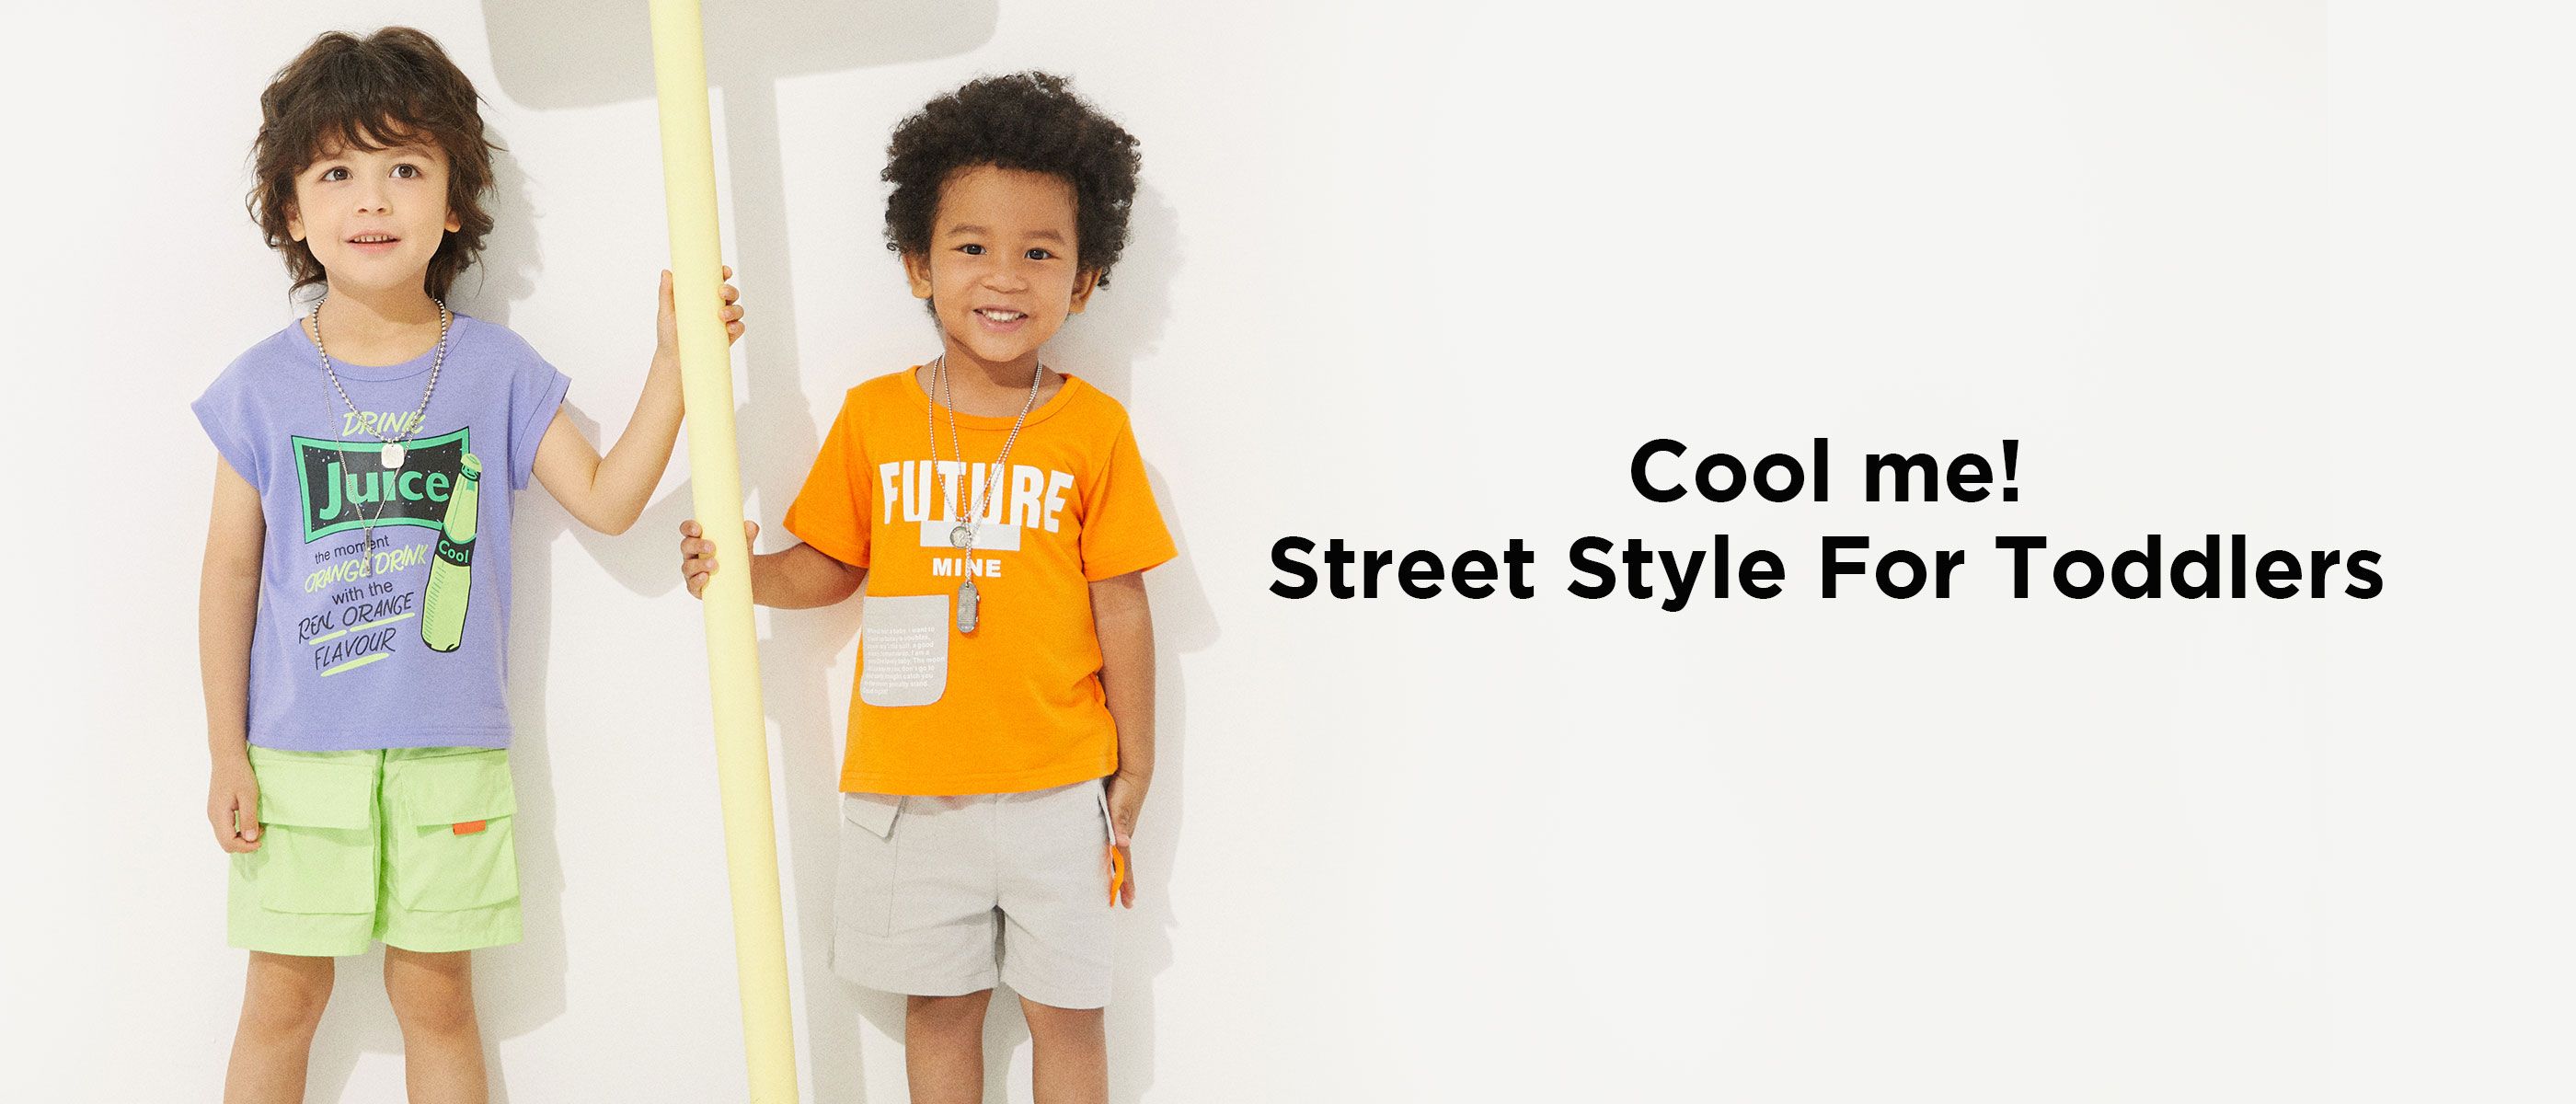 Cool me! Street Style For Toddlers